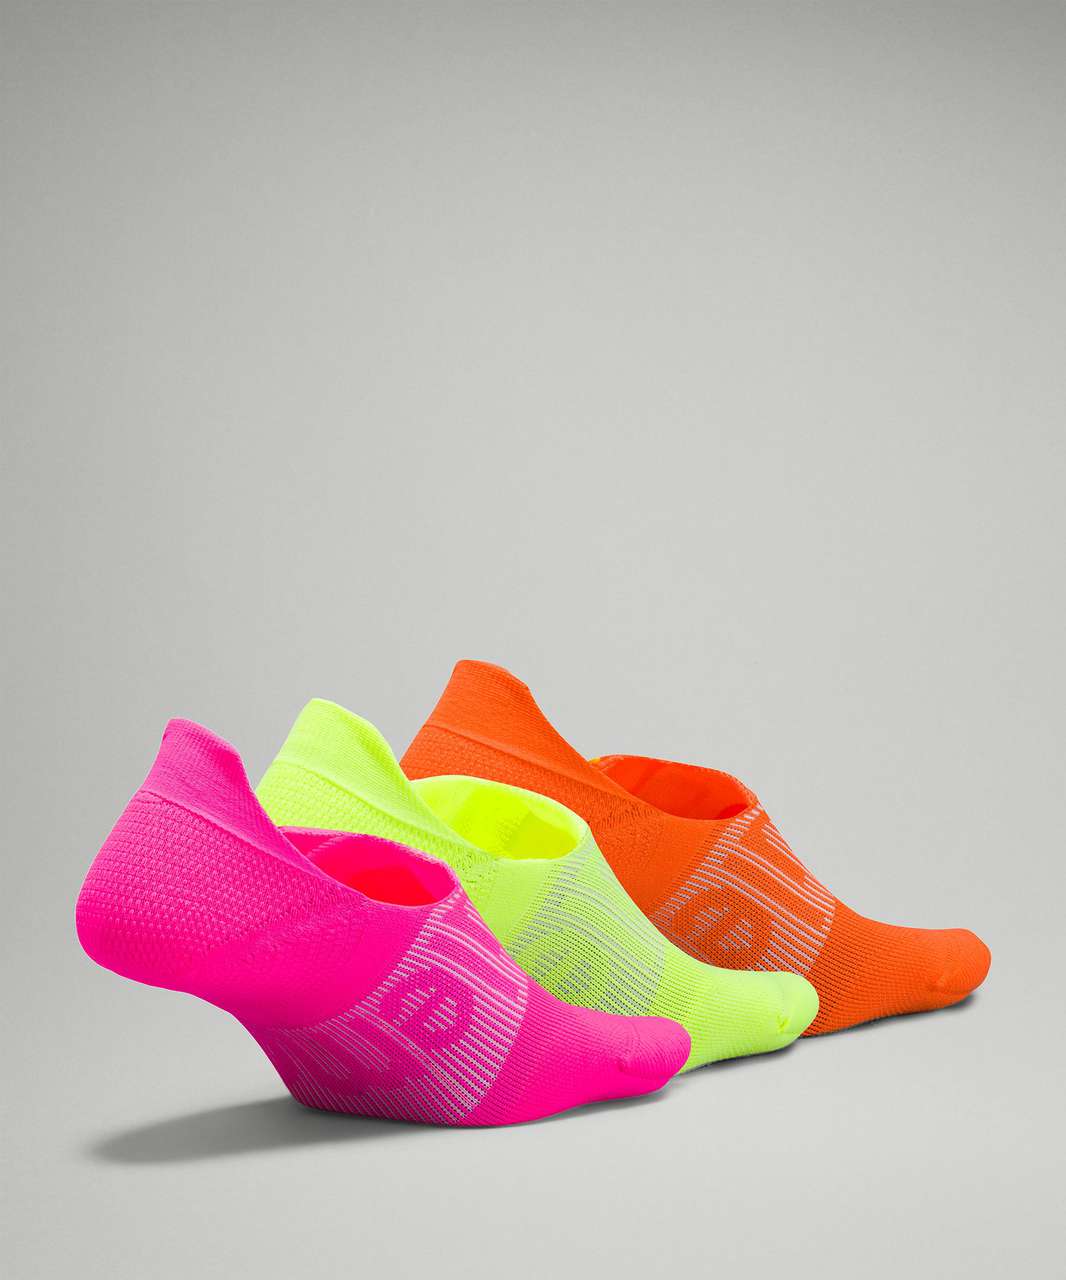 Lululemon Power Stride No-Show Sock with Active Grip 3 Pack - Highlight Pink / Highlight Yellow / Blaze Orange